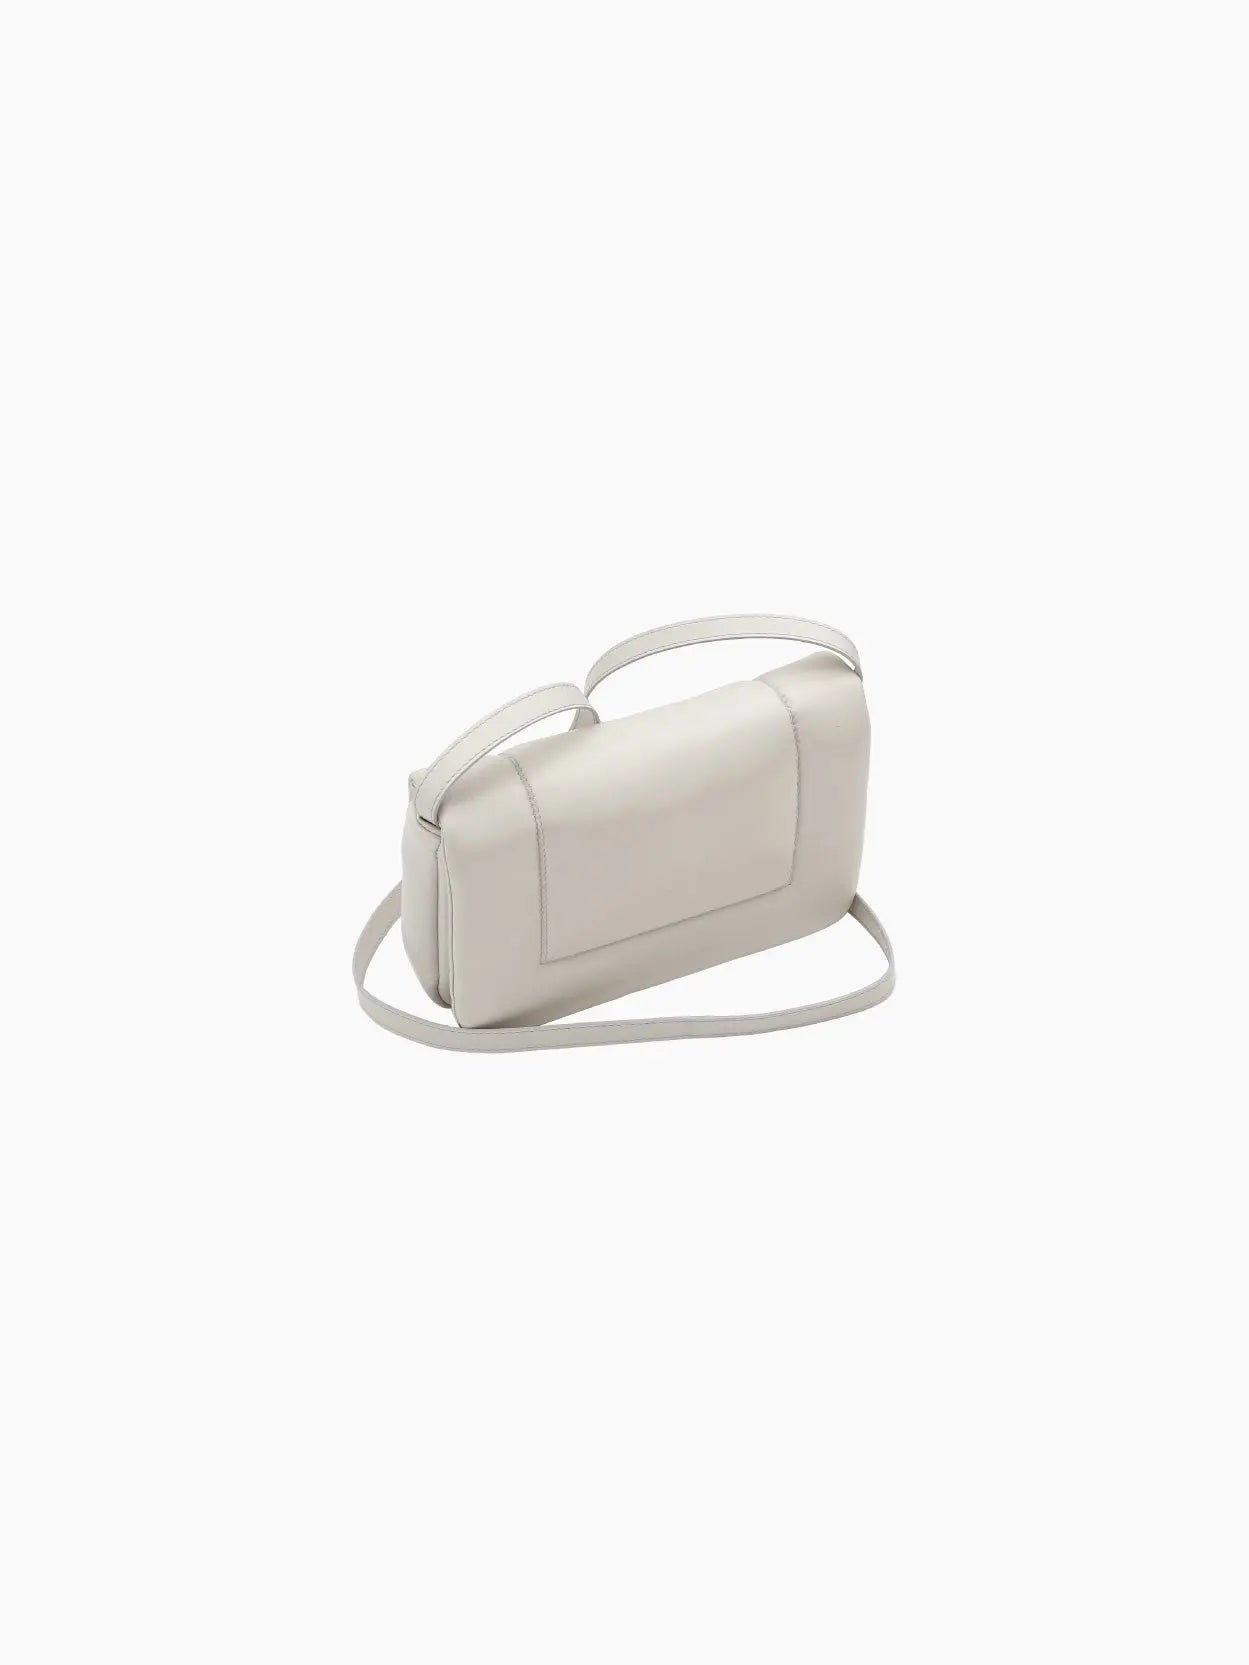 A small, rectangular, off-white Riquadro Clutch Mist from Marsèll is displayed against a plain white background. The handbag has a simple design with a flap closure and minimal detailing, reflecting the timeless elegance found in many Barcelona boutiques.